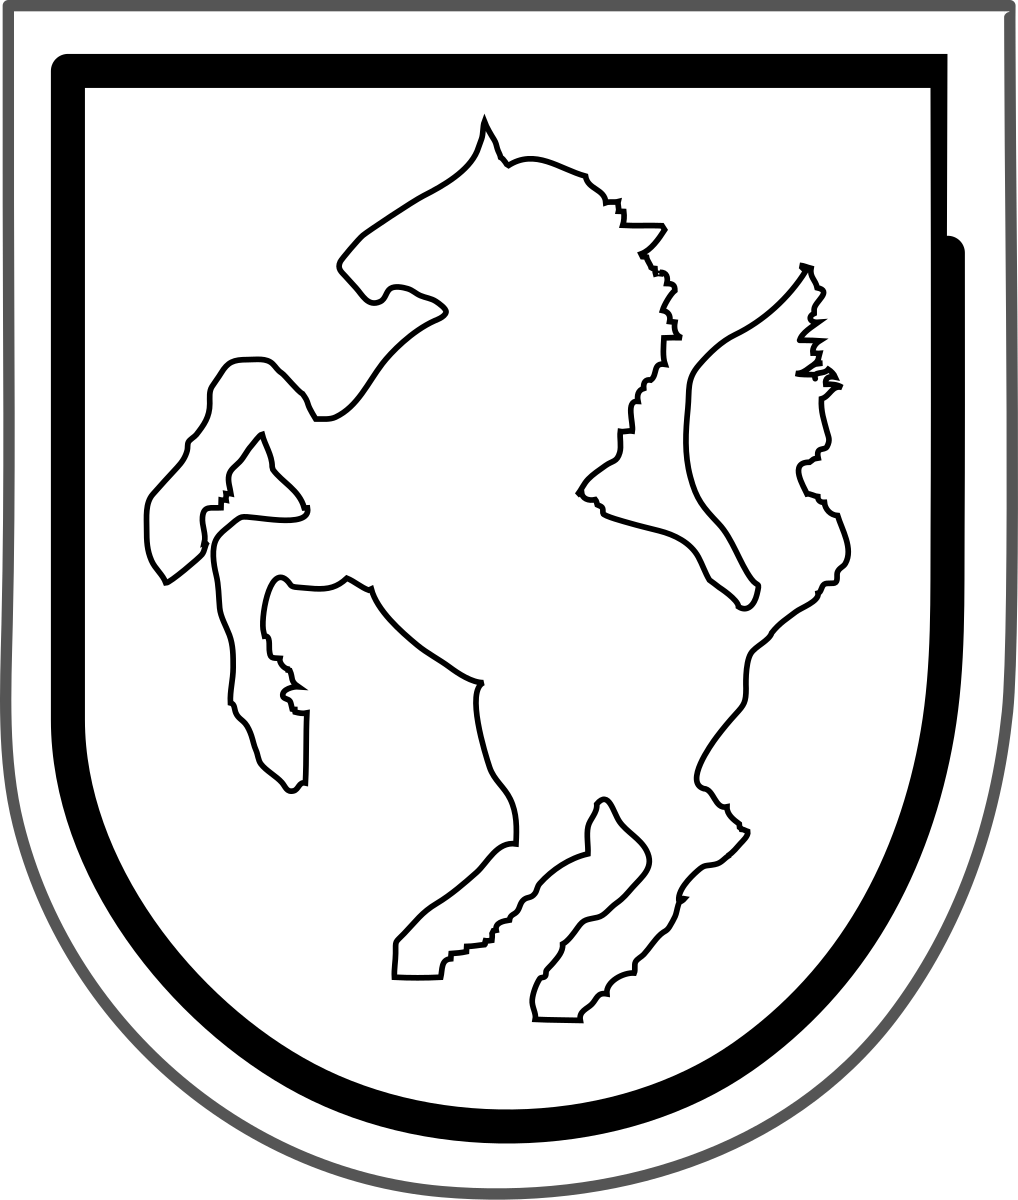 V Army Corps (Wehrmacht)